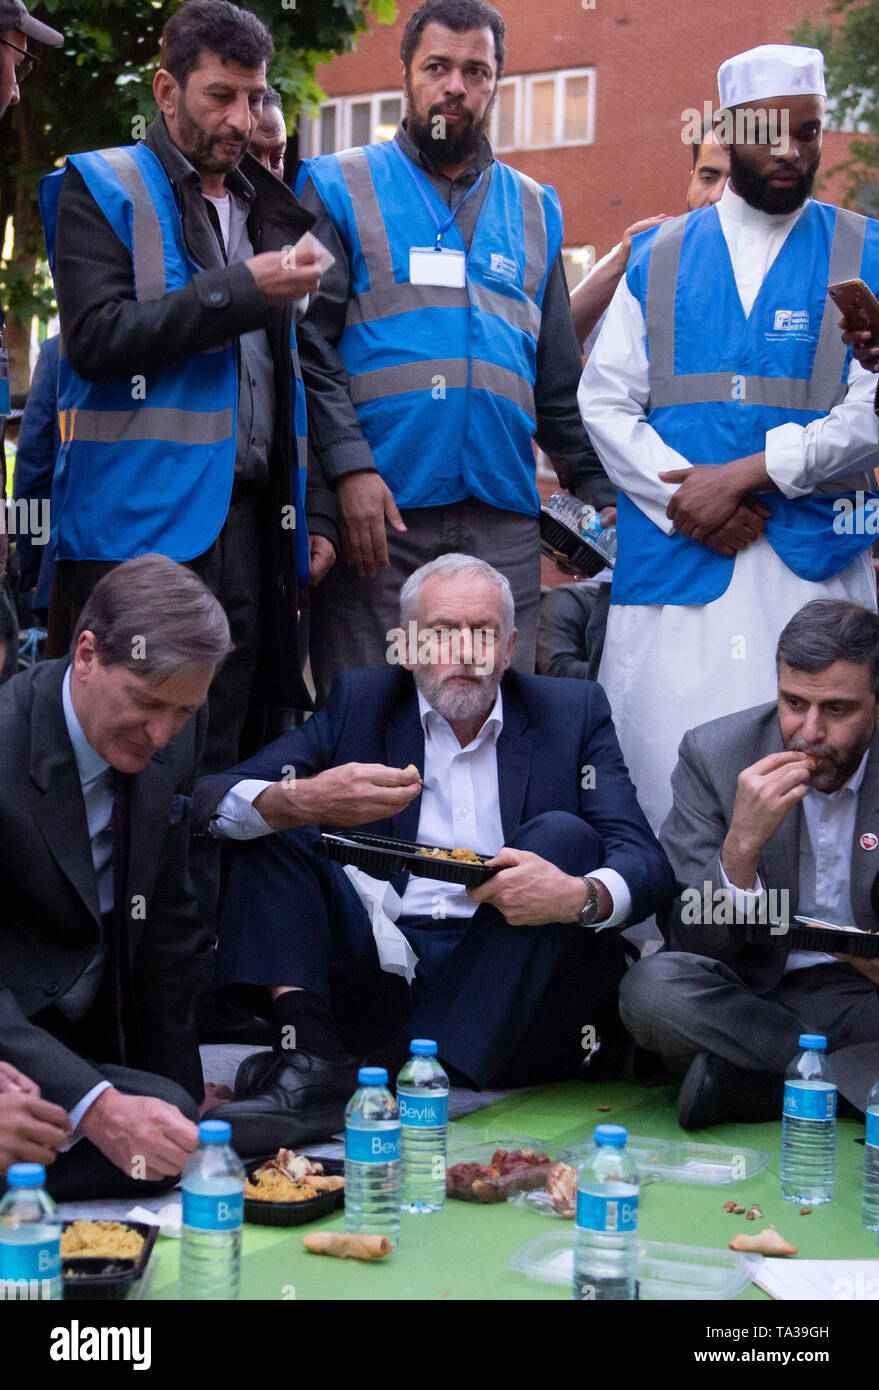 Dominic Grieve and Labour Party leader Jeremy Corbyn join a street iftar meal outside Finsbury Park Mosque in London, on the second anniversary of the Finsbury Park terrorist attack. Stock Photo